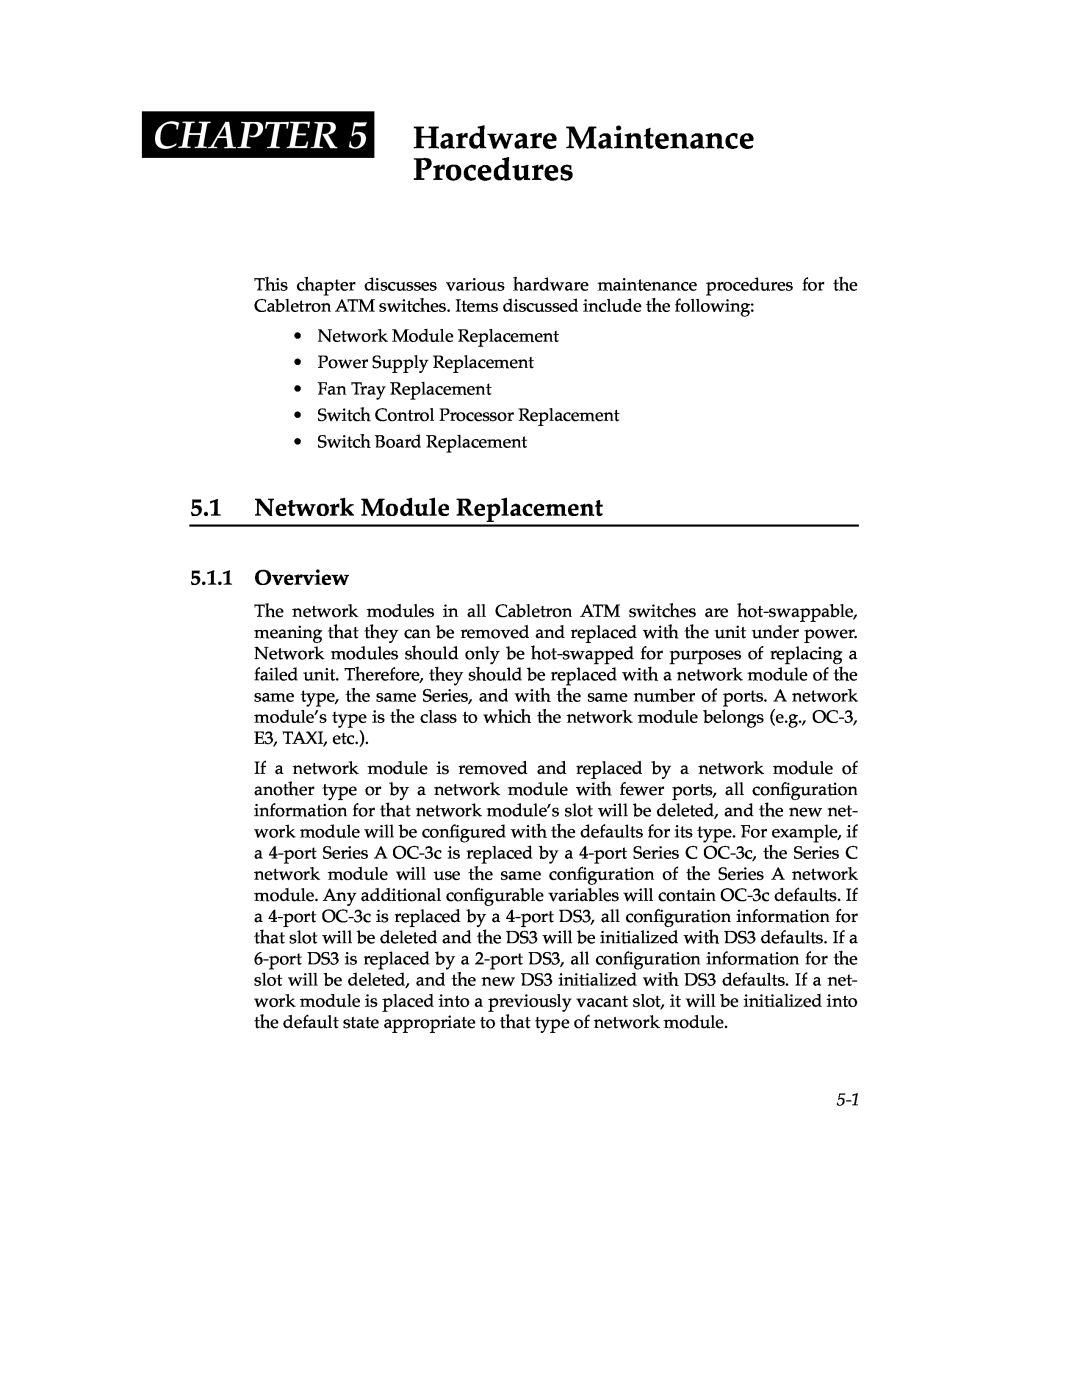 Cabletron Systems 9A000 manual Hardware Maintenance Procedures, Network Module Replacement, Overview, Chapter 